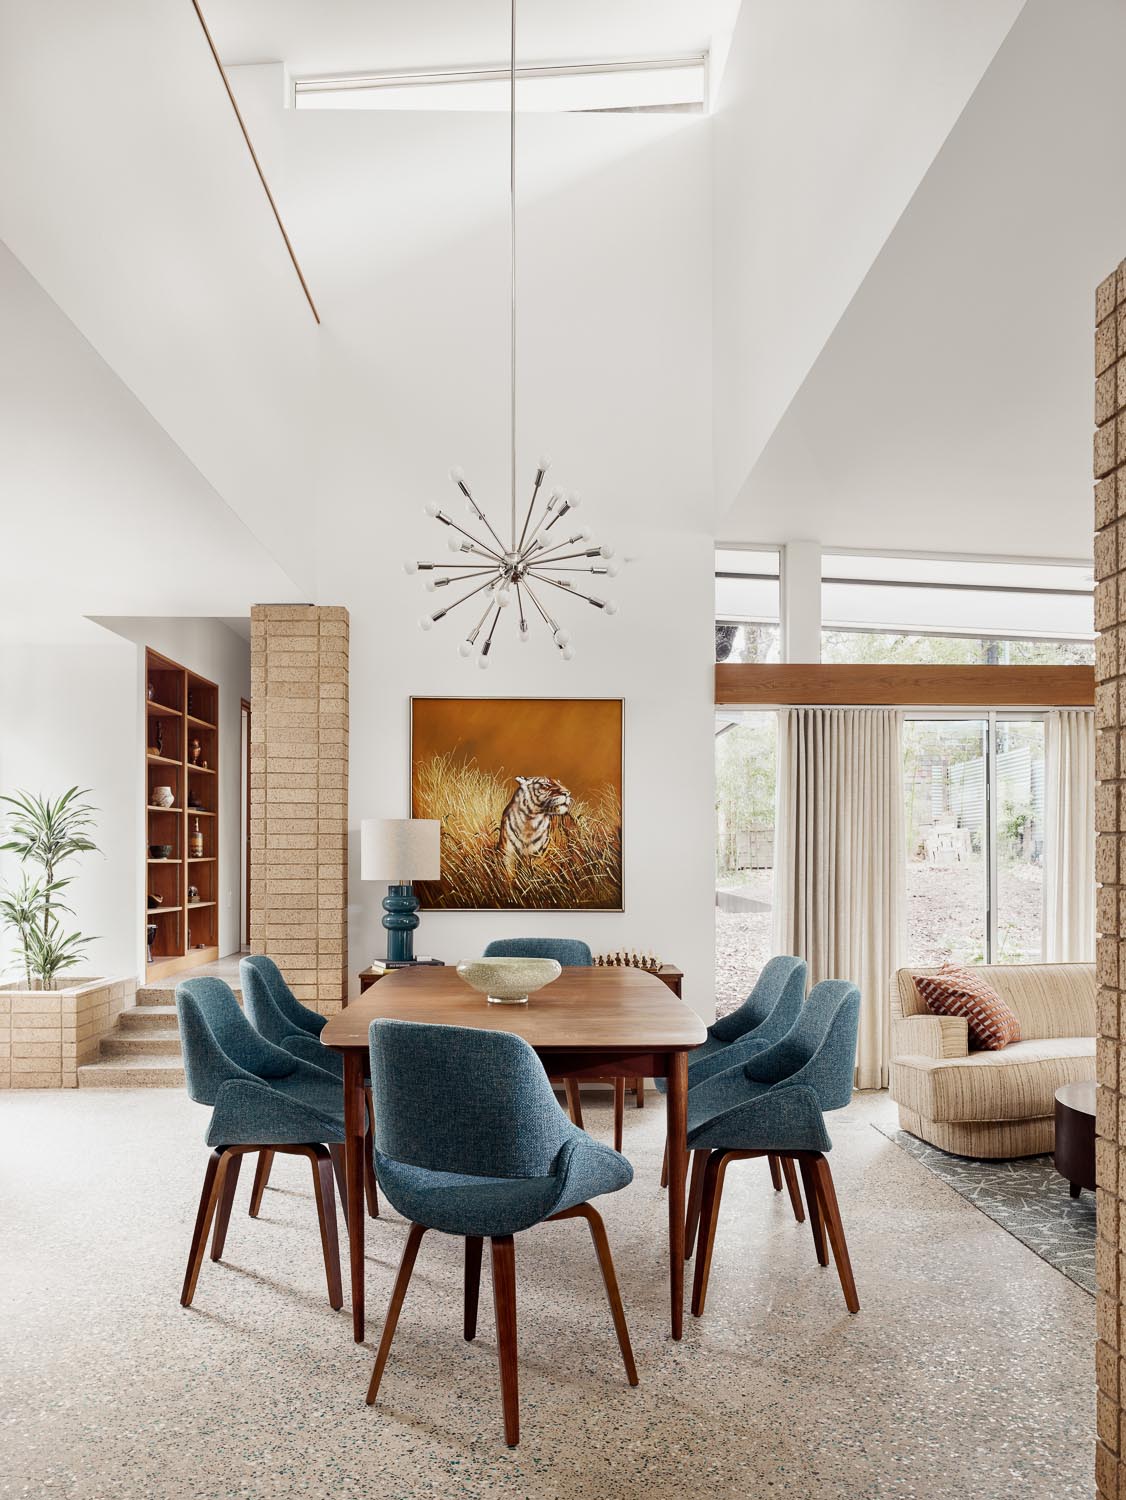 In this mid-century modern inspired dining room, there's a dark wood table with matching chairs that add a pop of color to the open plan interior. A Sputnik inspired pendant light draws the eye upwards to the high ceiling.